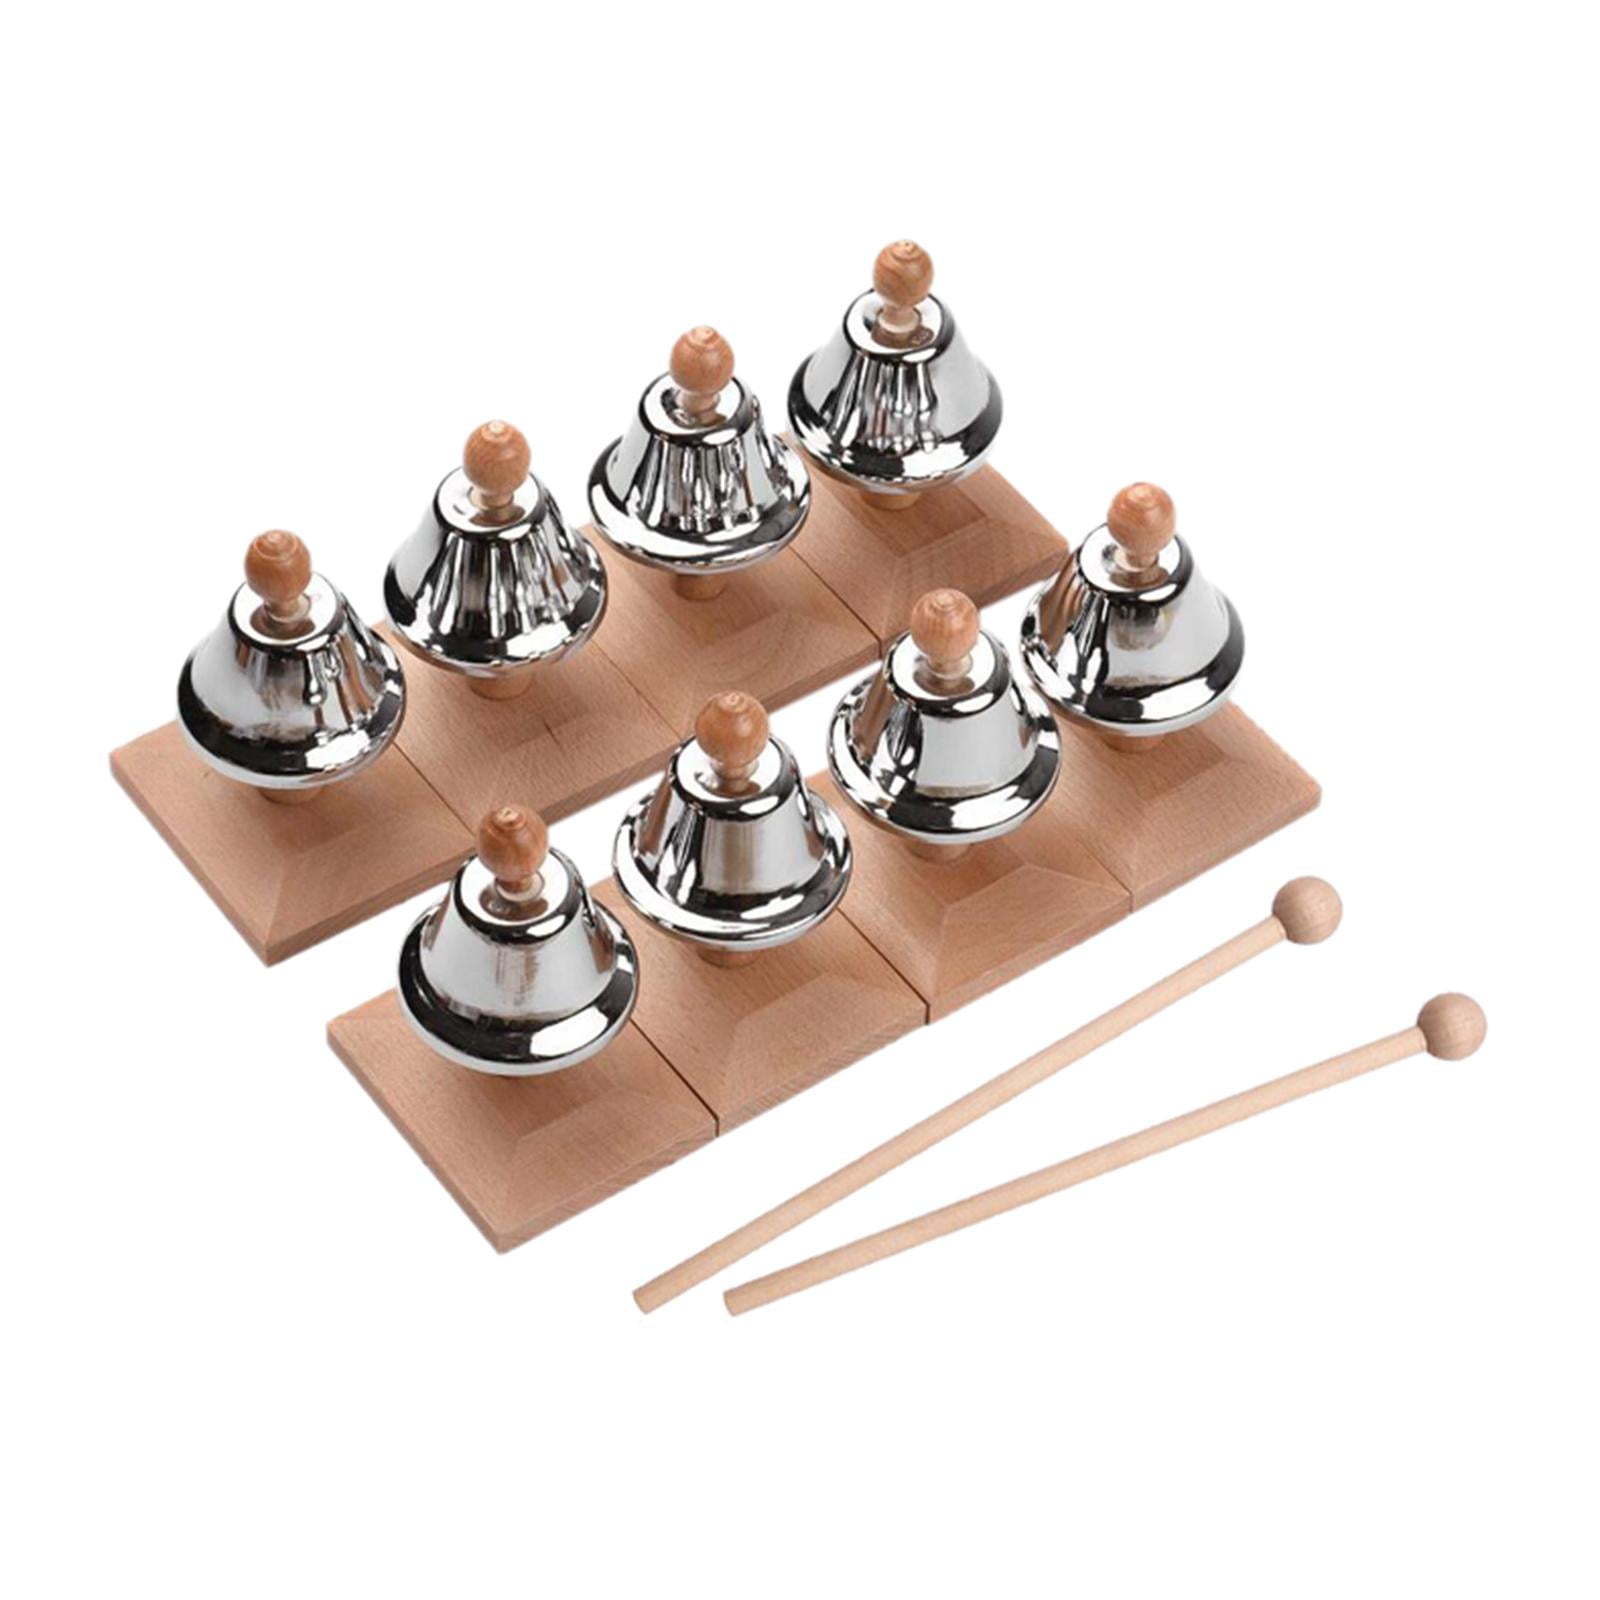 Holiday Birthday Gift for Kids Desk Bells Hand Bells,8 Notes Diatonic Metal Hand Bells Percussion Instrument Musical Teaching Chromatic 